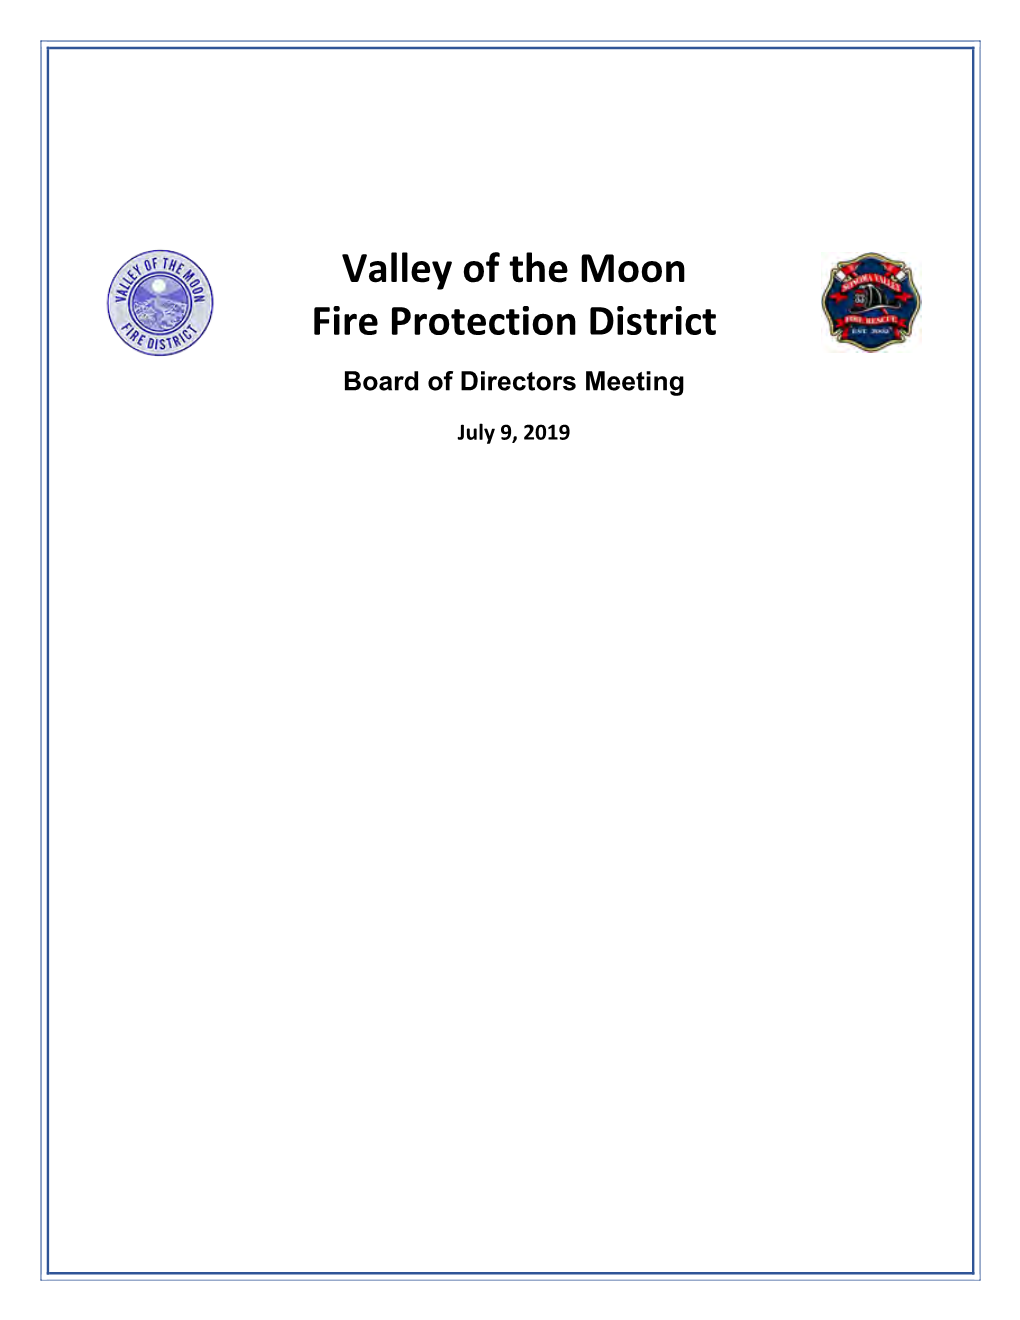 Valley of the Moon Fire Protection District